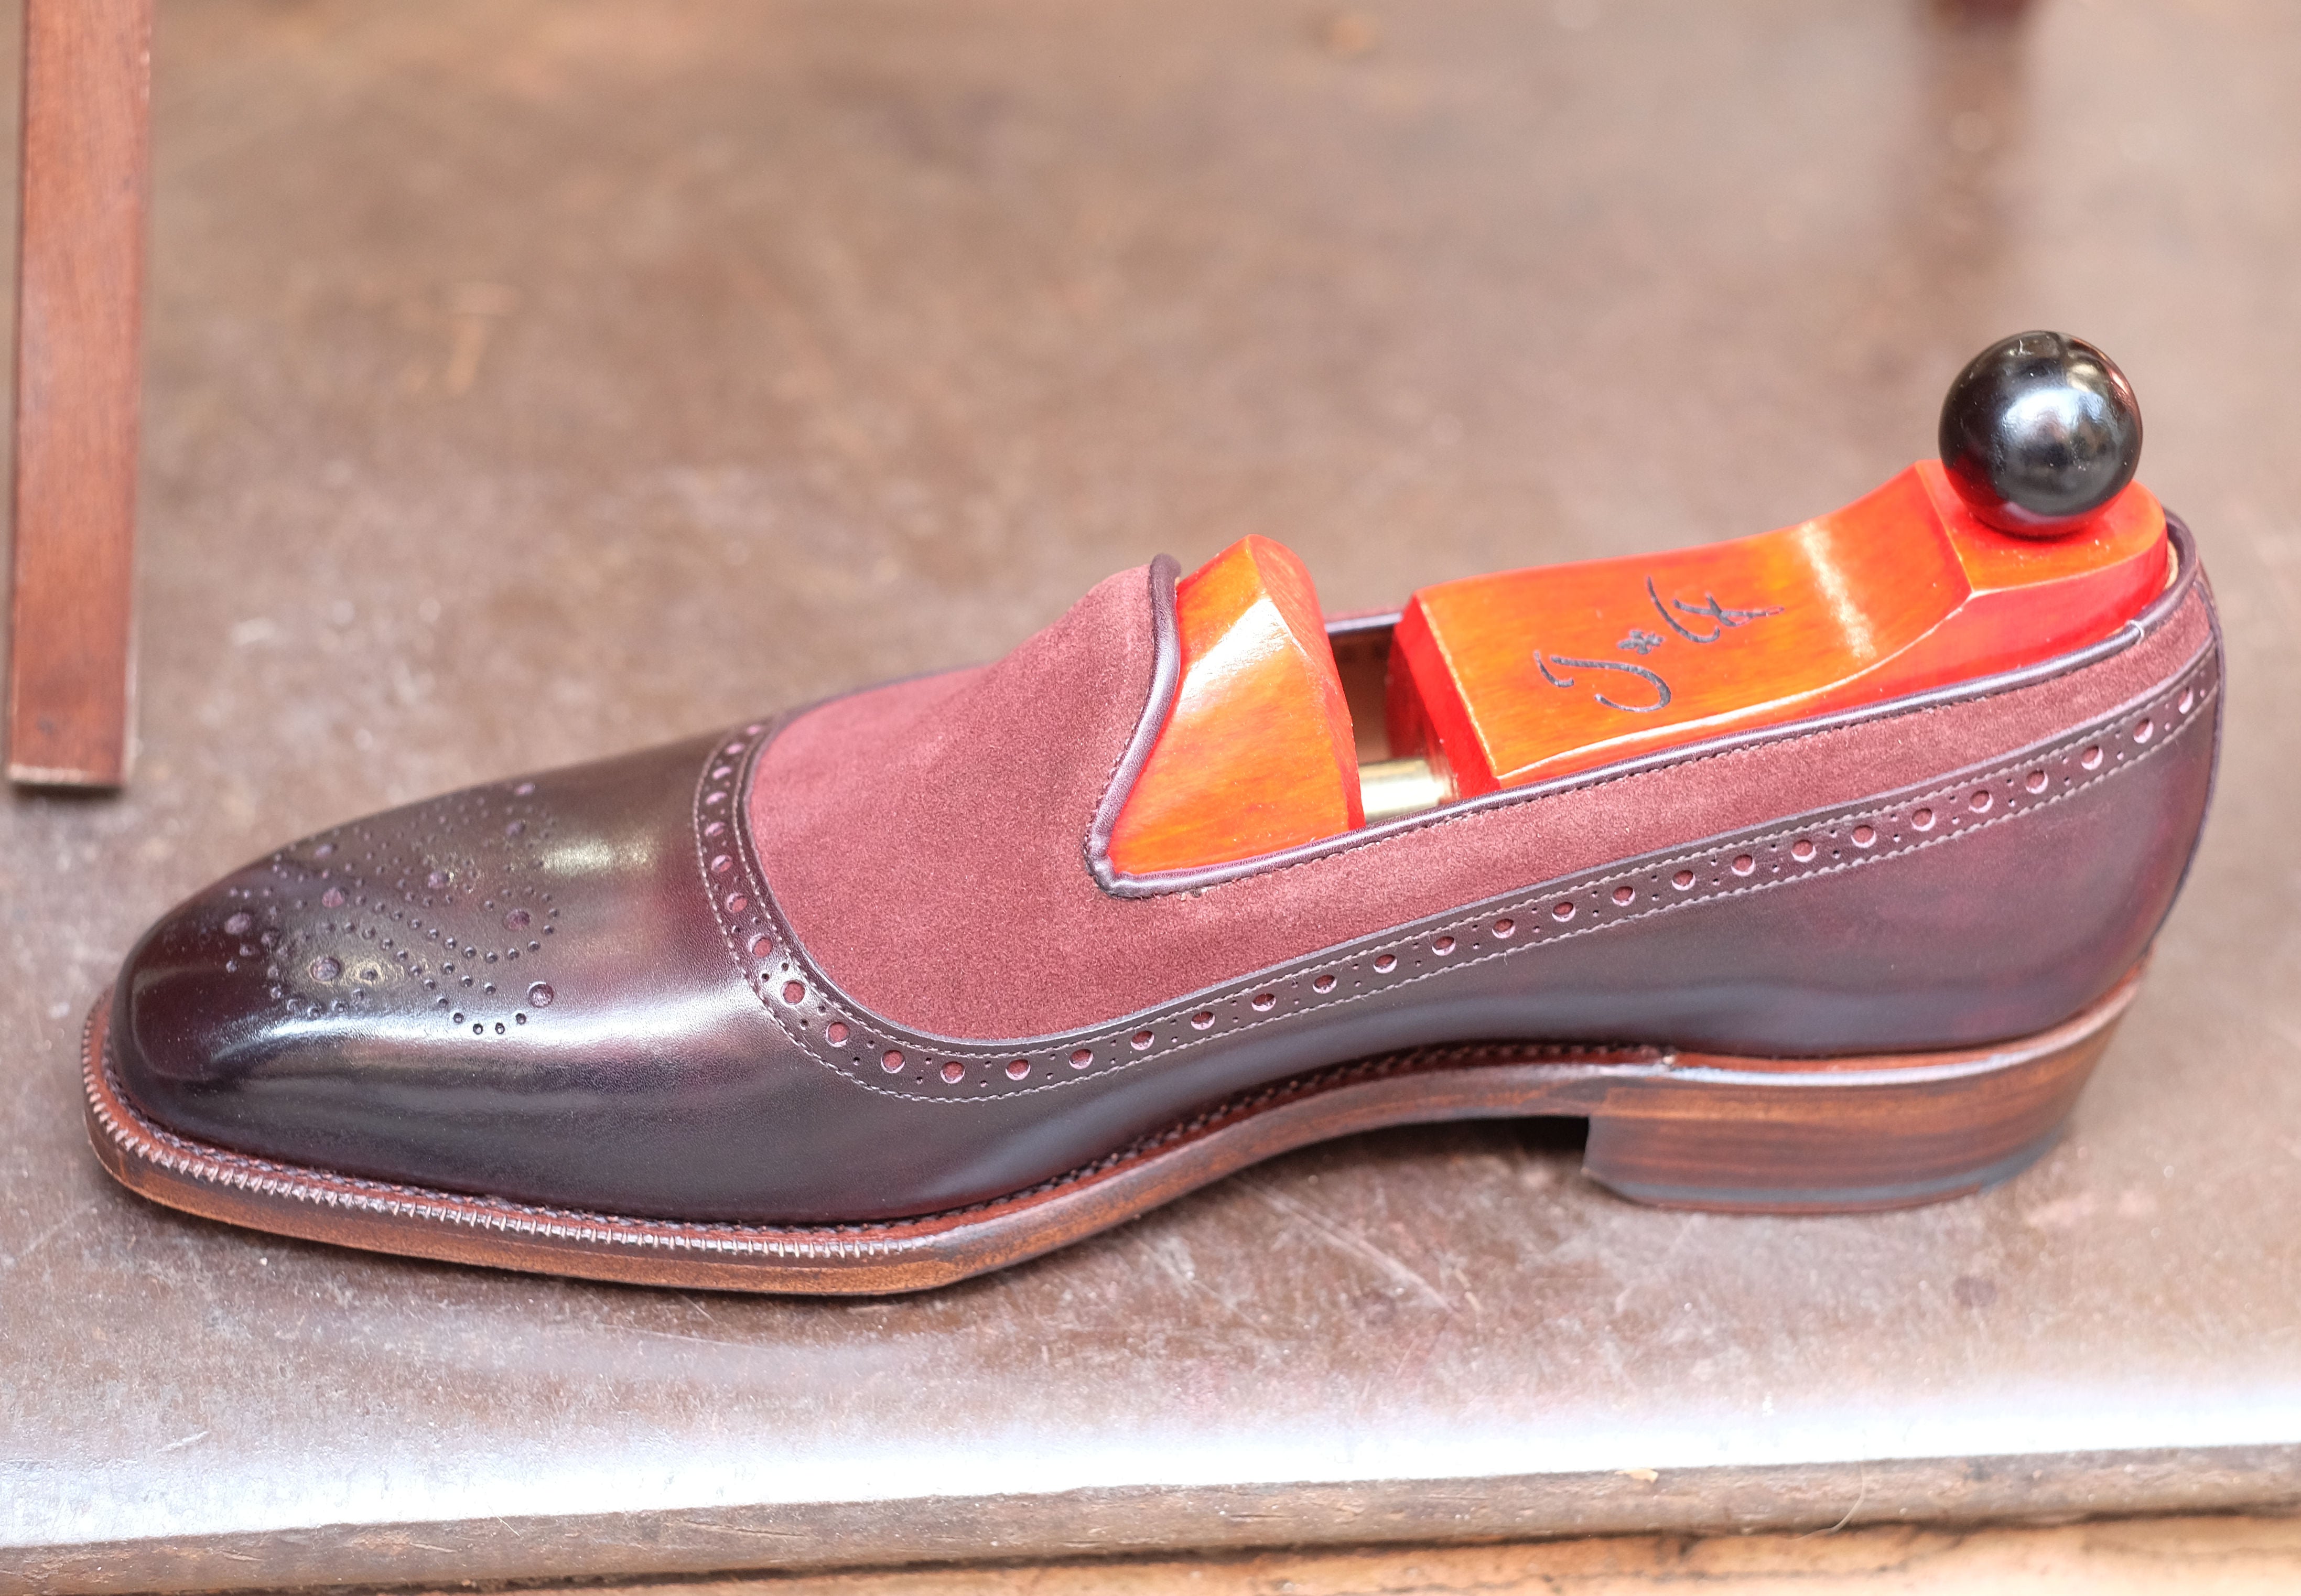 Bothell - MTO - Plum Museum Calf / Burgundy Suede - LPB Last - Single Leather Sole